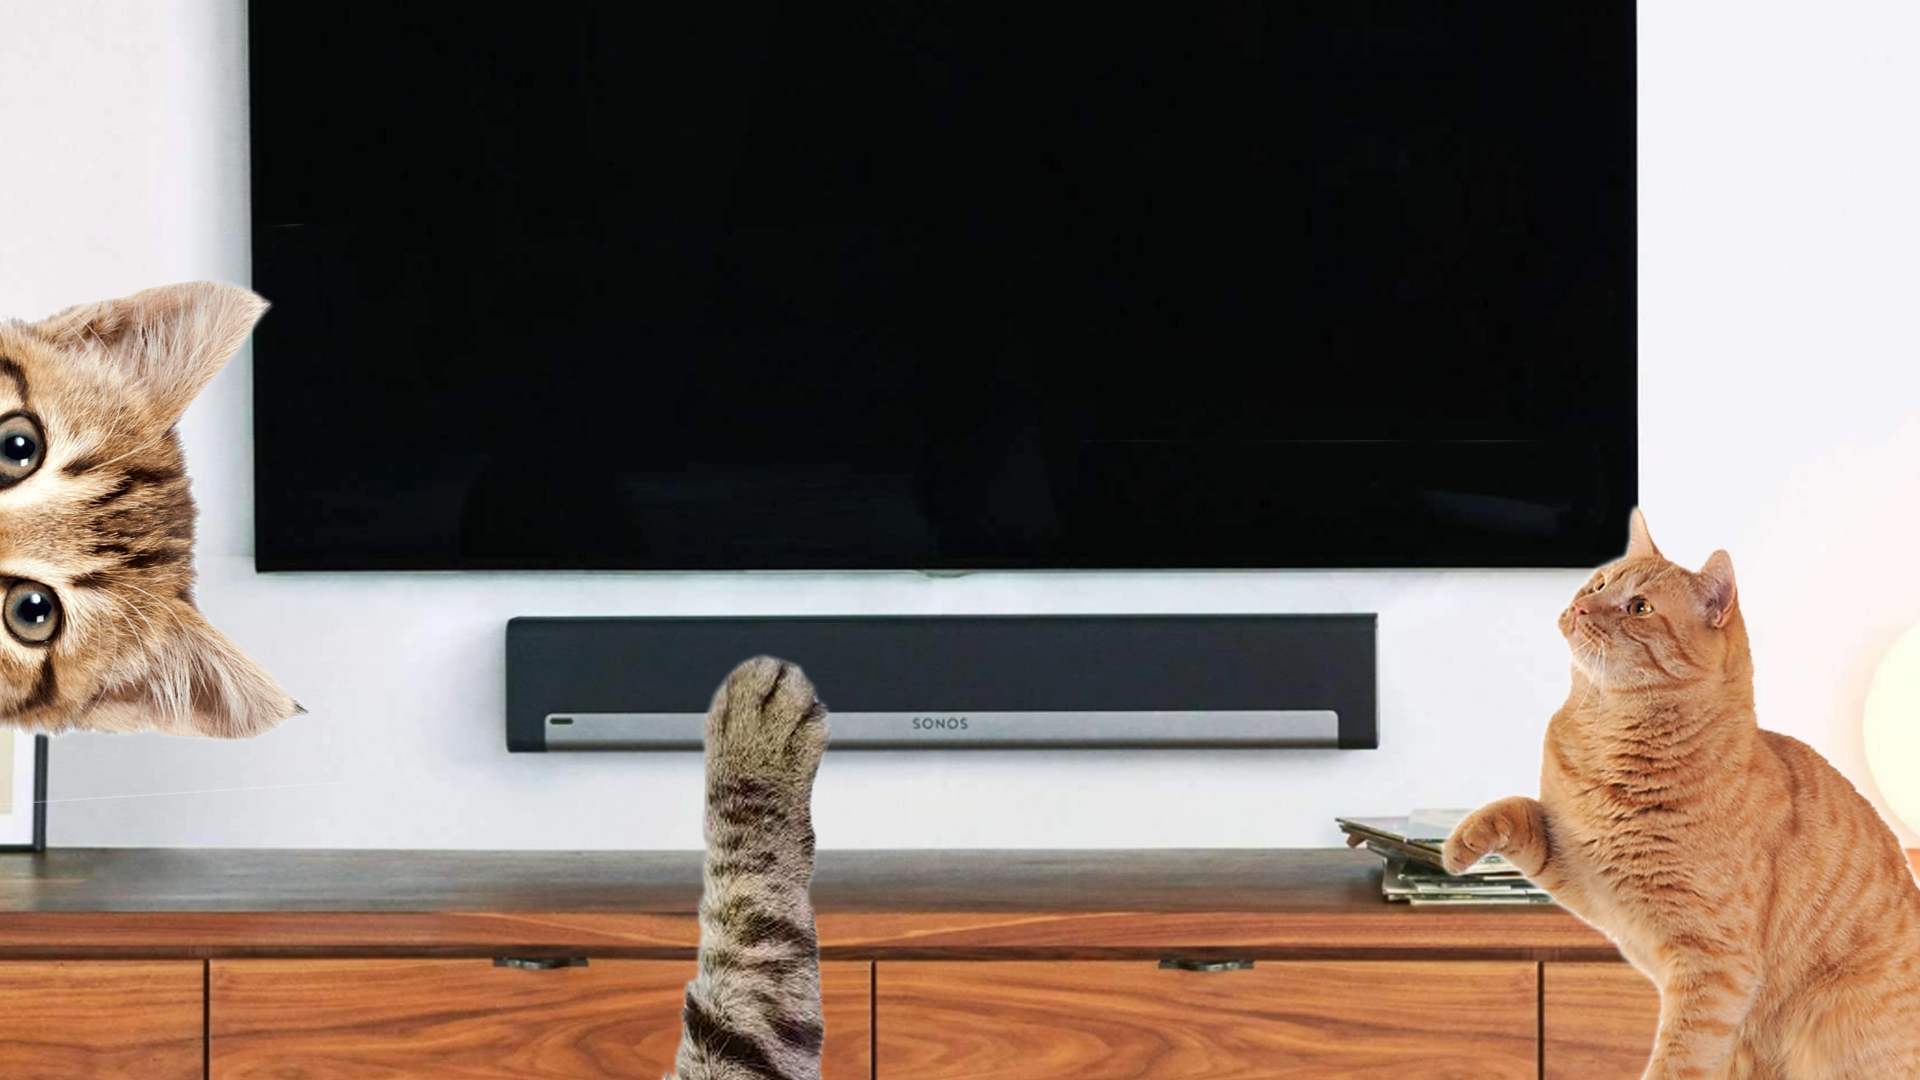 sonos playbar with cats